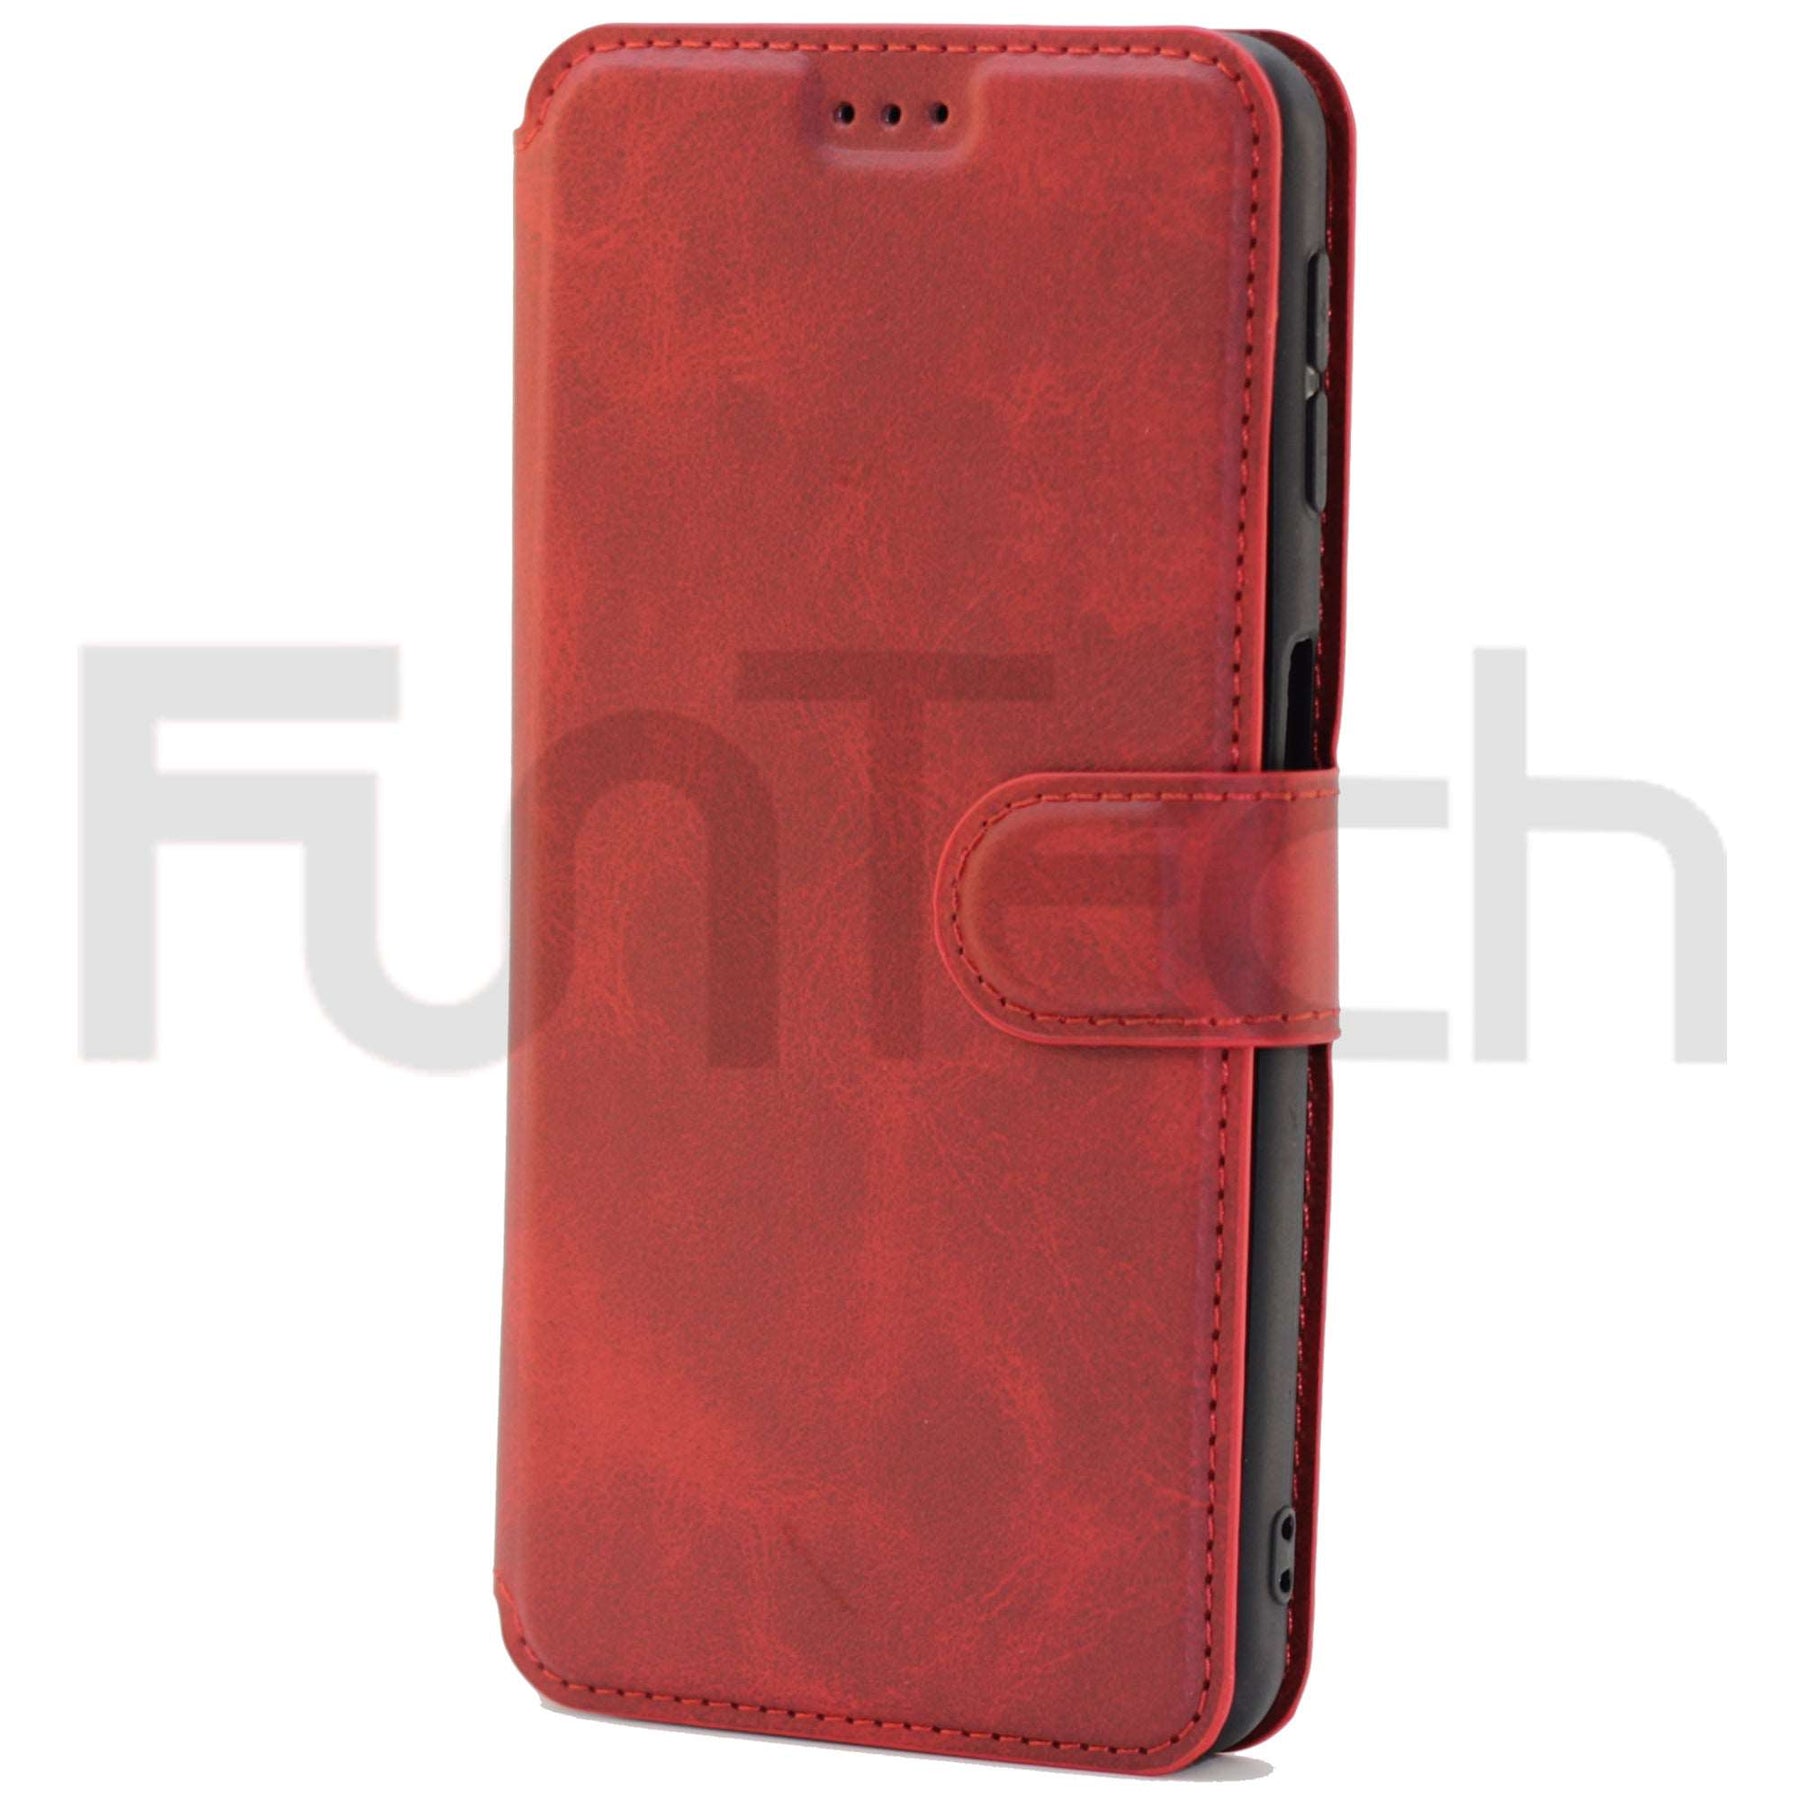 Samsung A7 2018 Leather Wallet Case Color Red